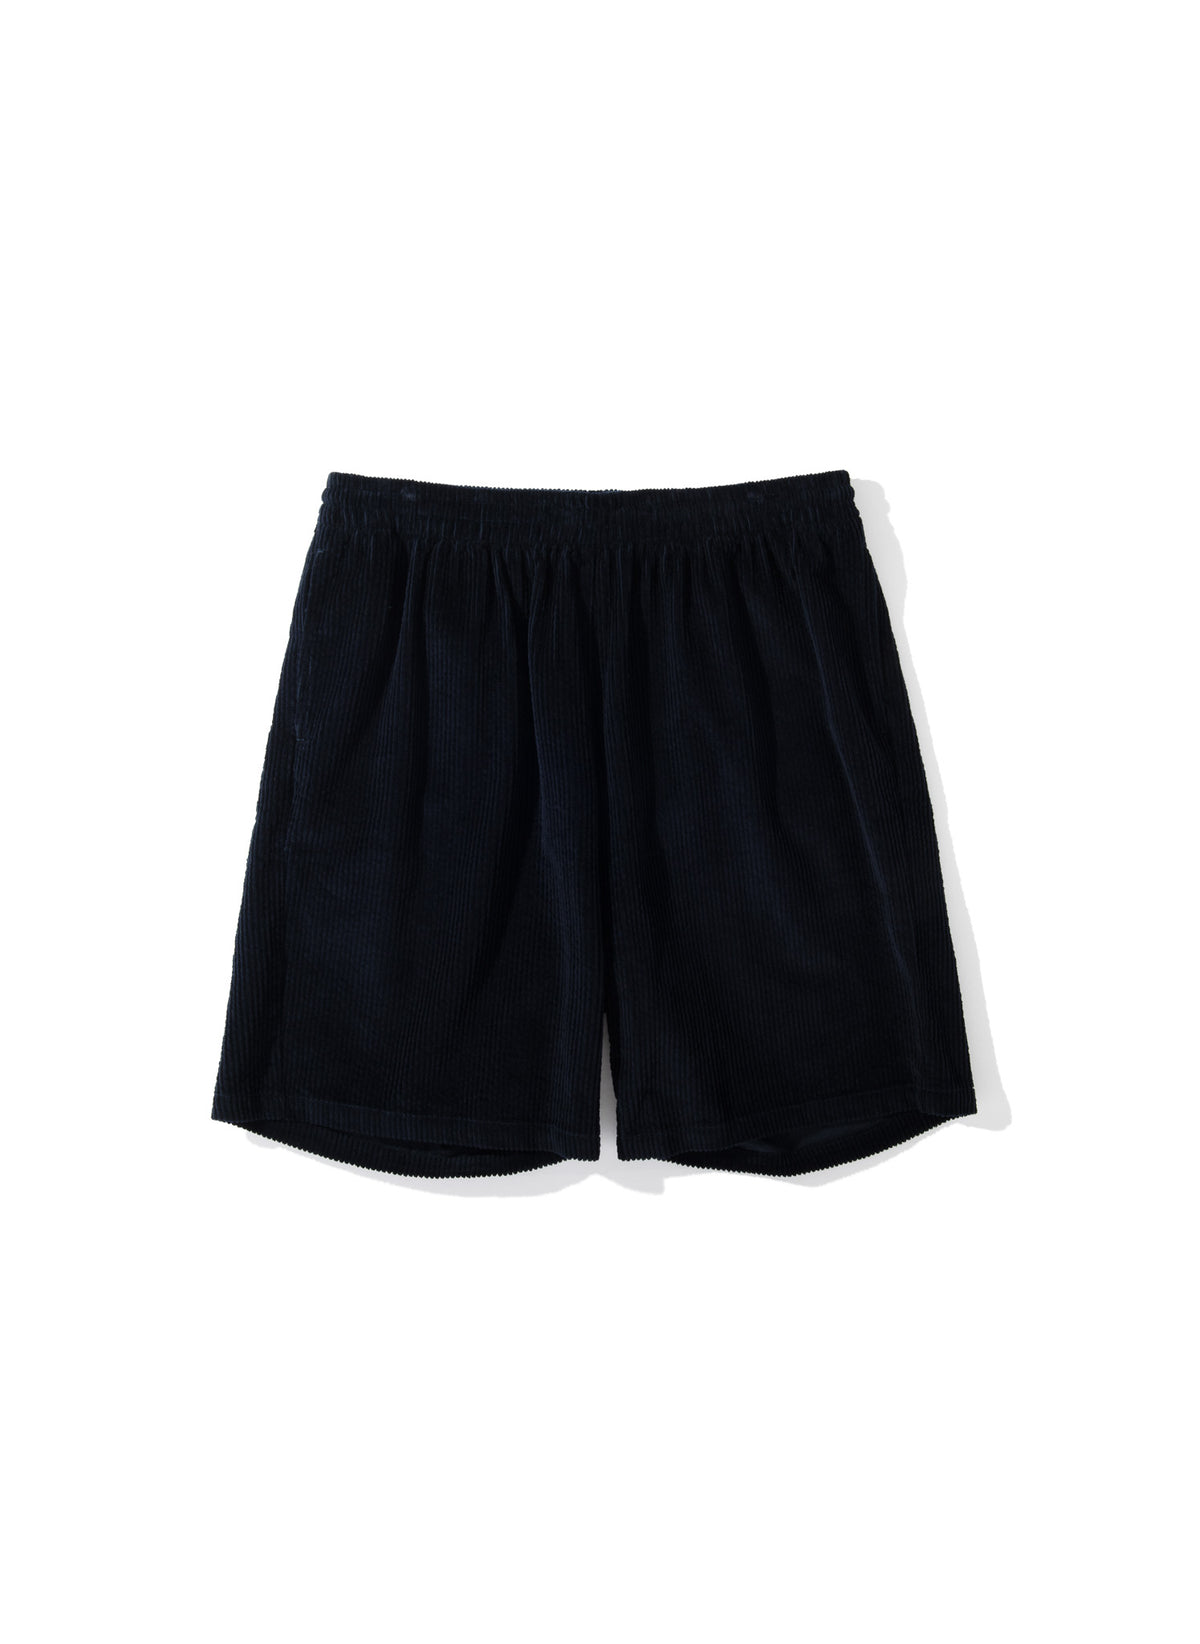 <span style="color: #f50b0b;">Last One</span> 
Acy / C SHORTS NAVY